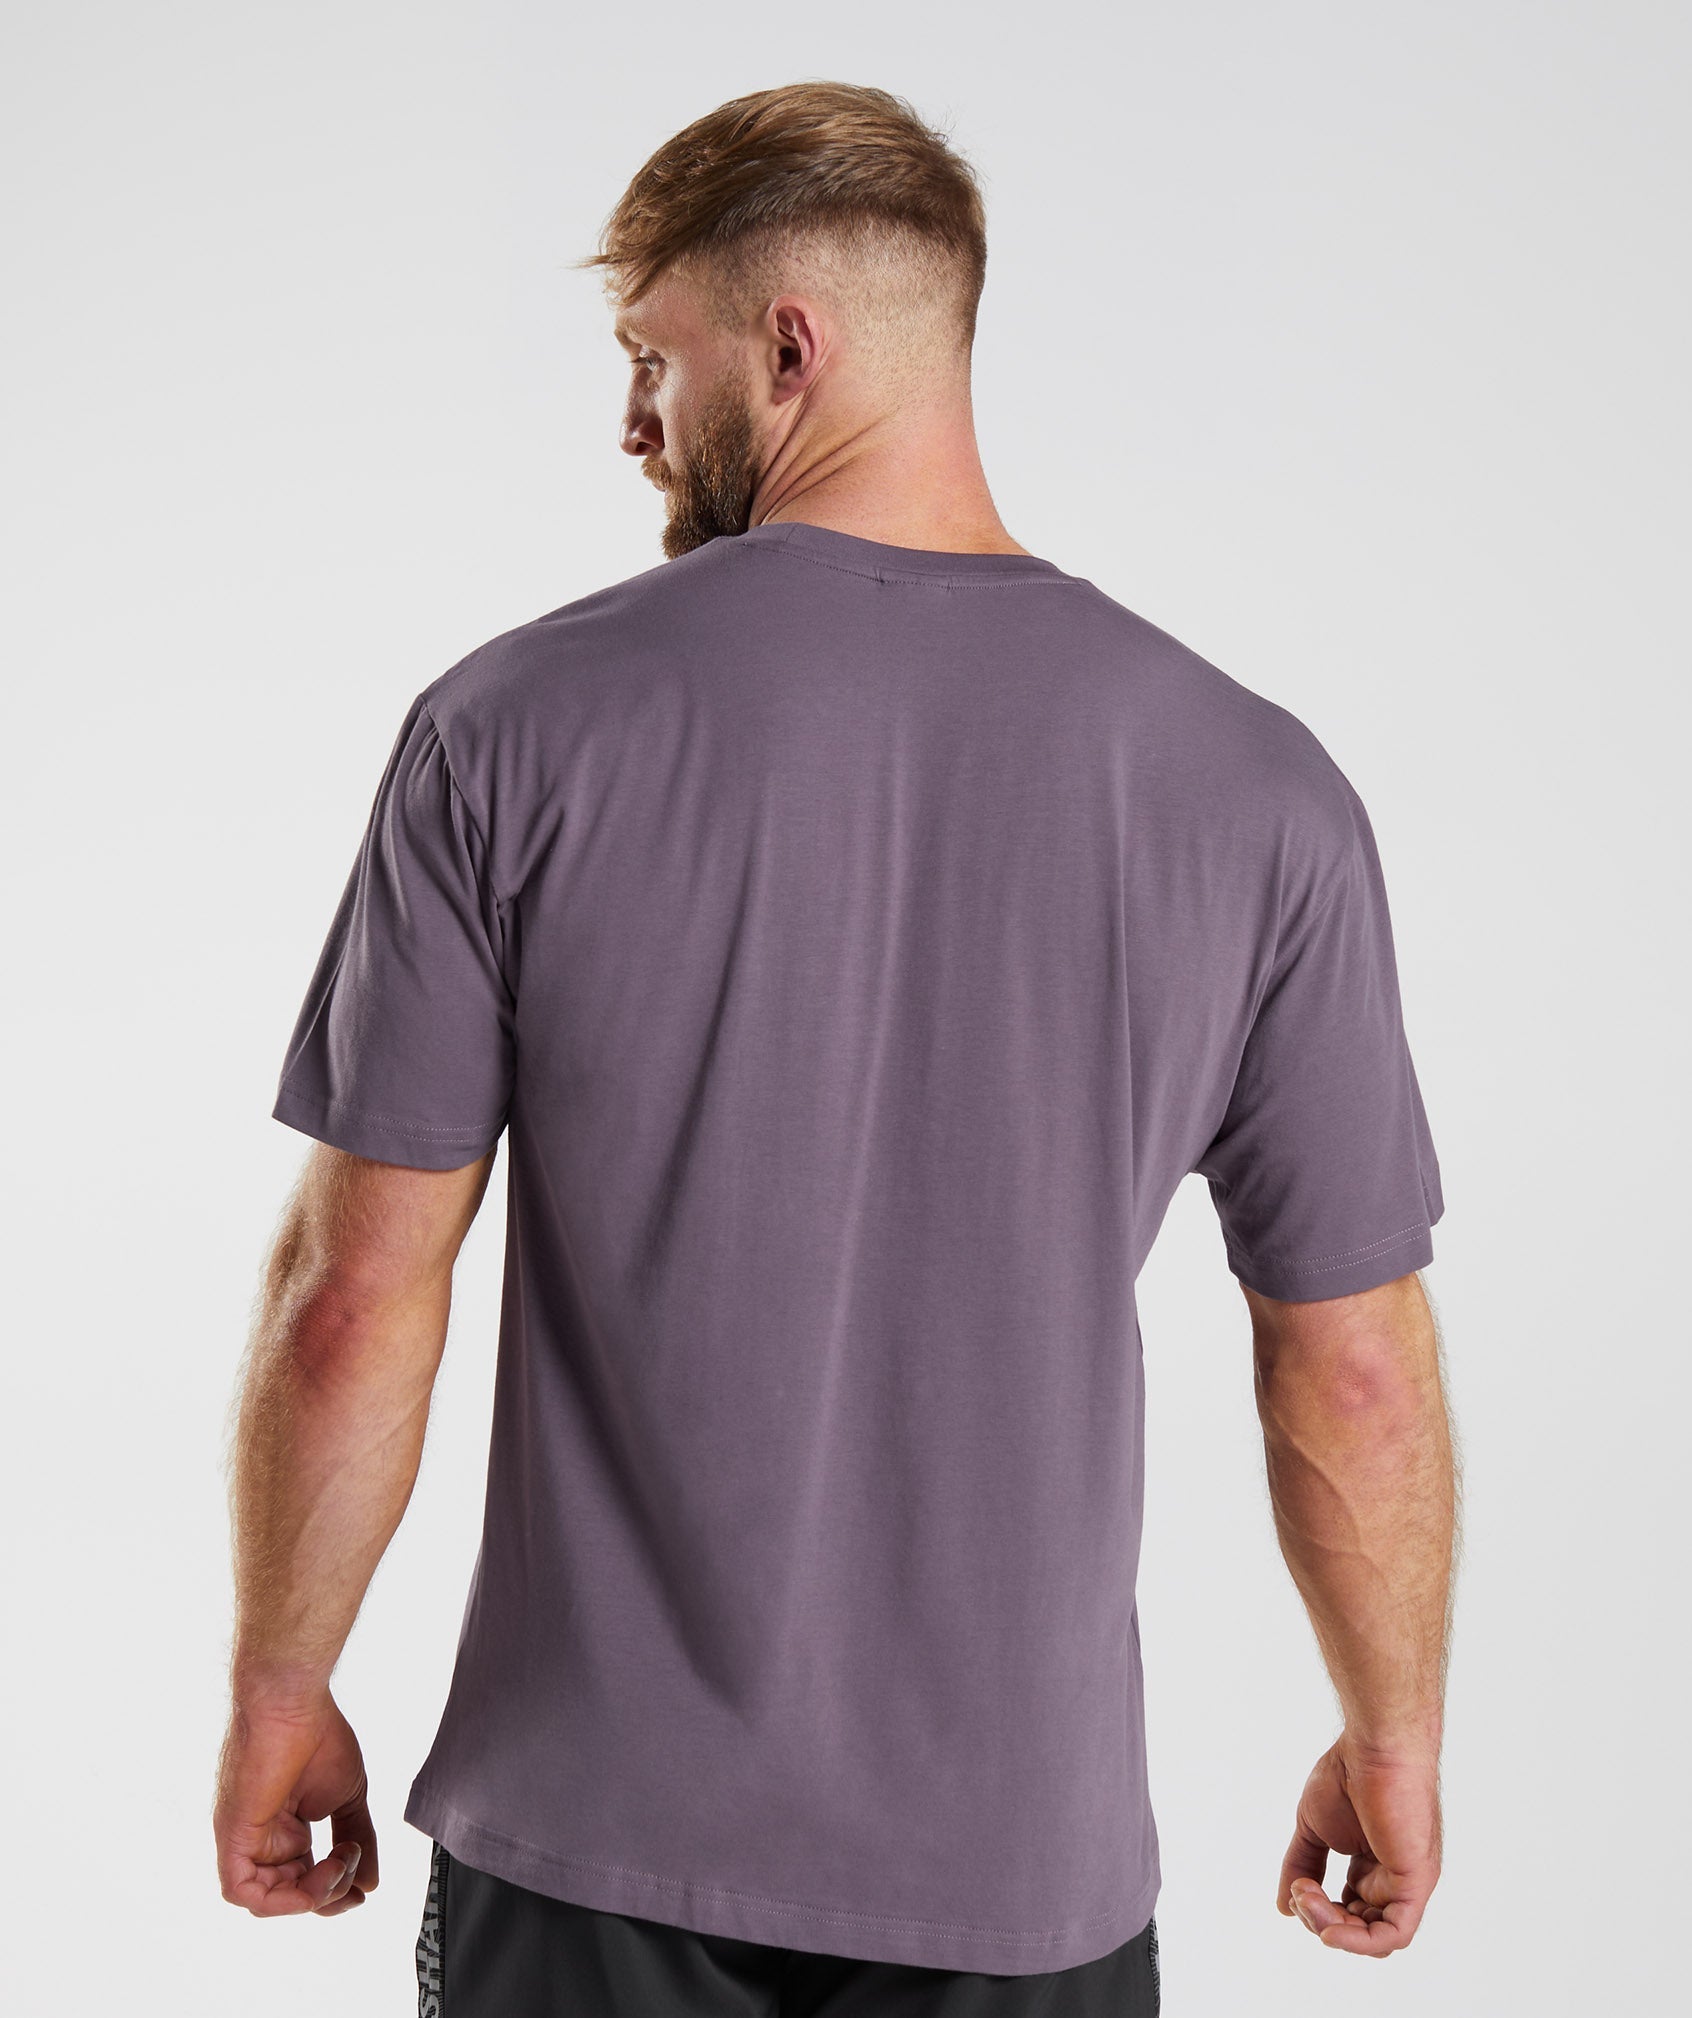 Apollo Oversized T-Shirt in Musk Lilac